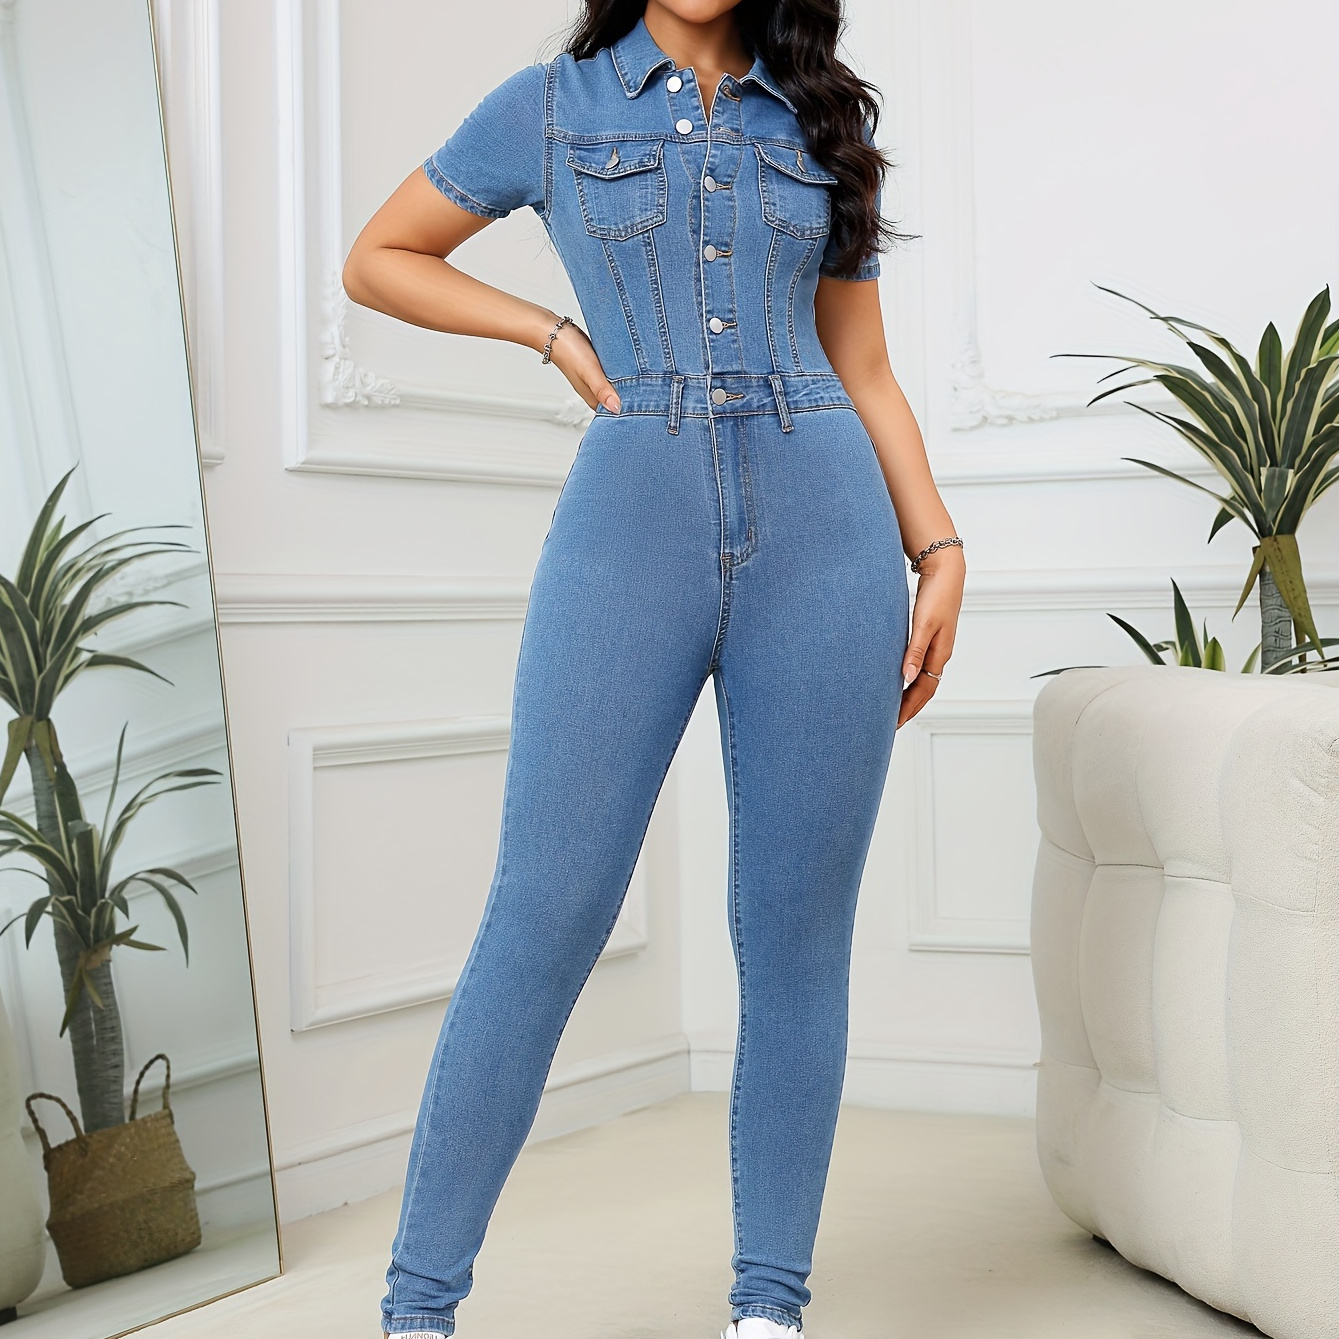 

Women's Sexy Denim Jumpsuit, Slim Fit Jean Romper, Short Sleeve Button-down Stretchy Outfit With Pockets For Casual Wear